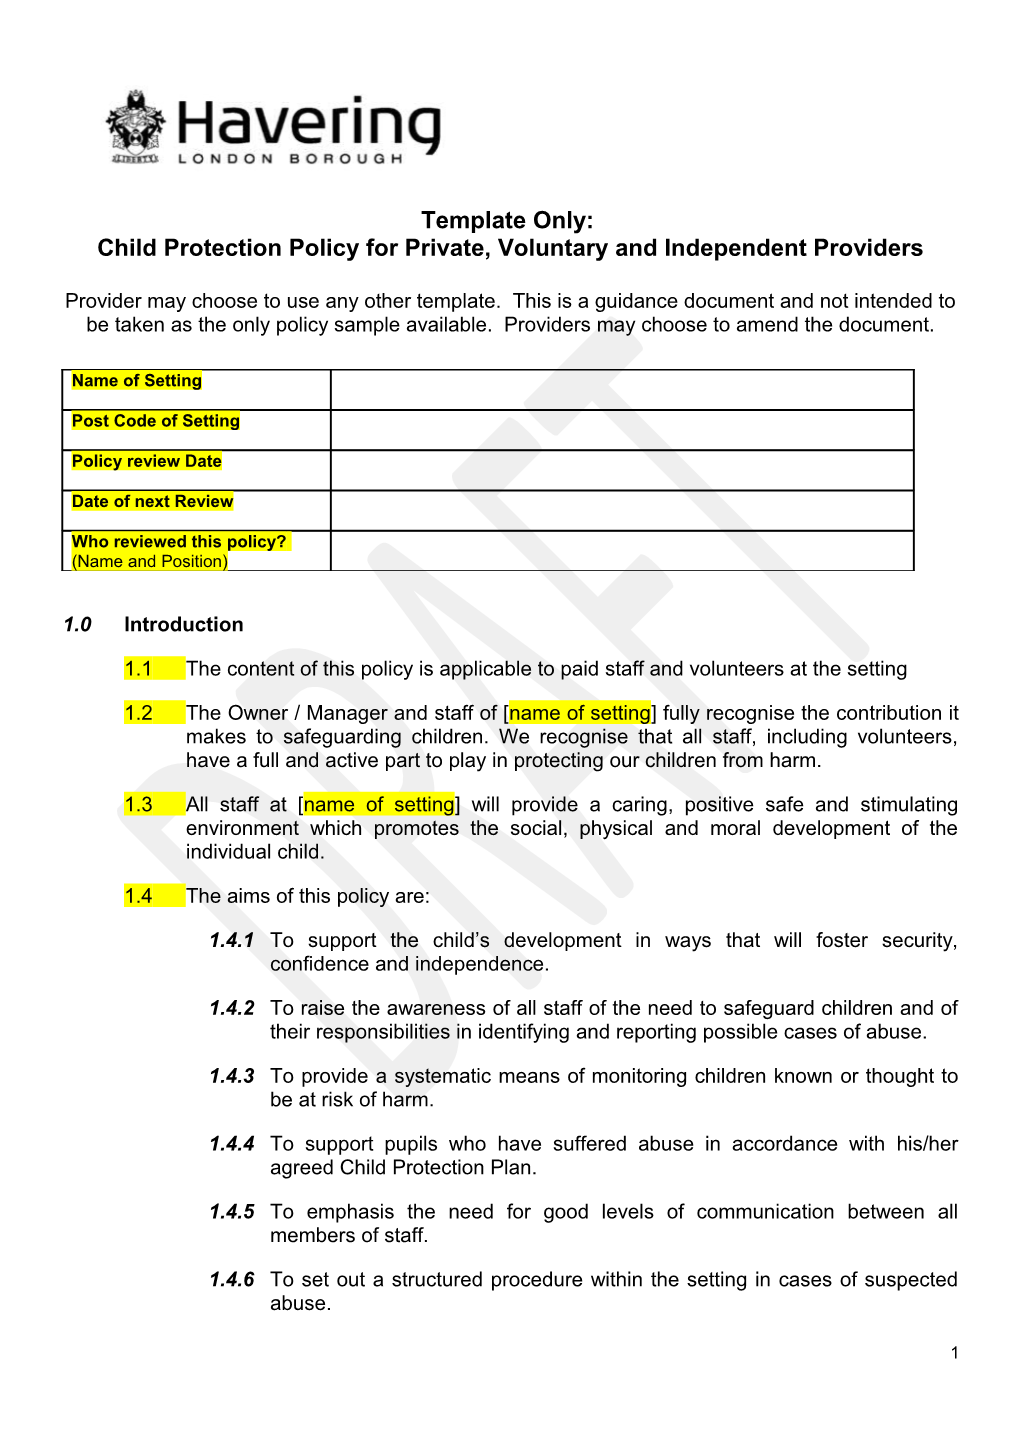 Model Child Protection Policy s1